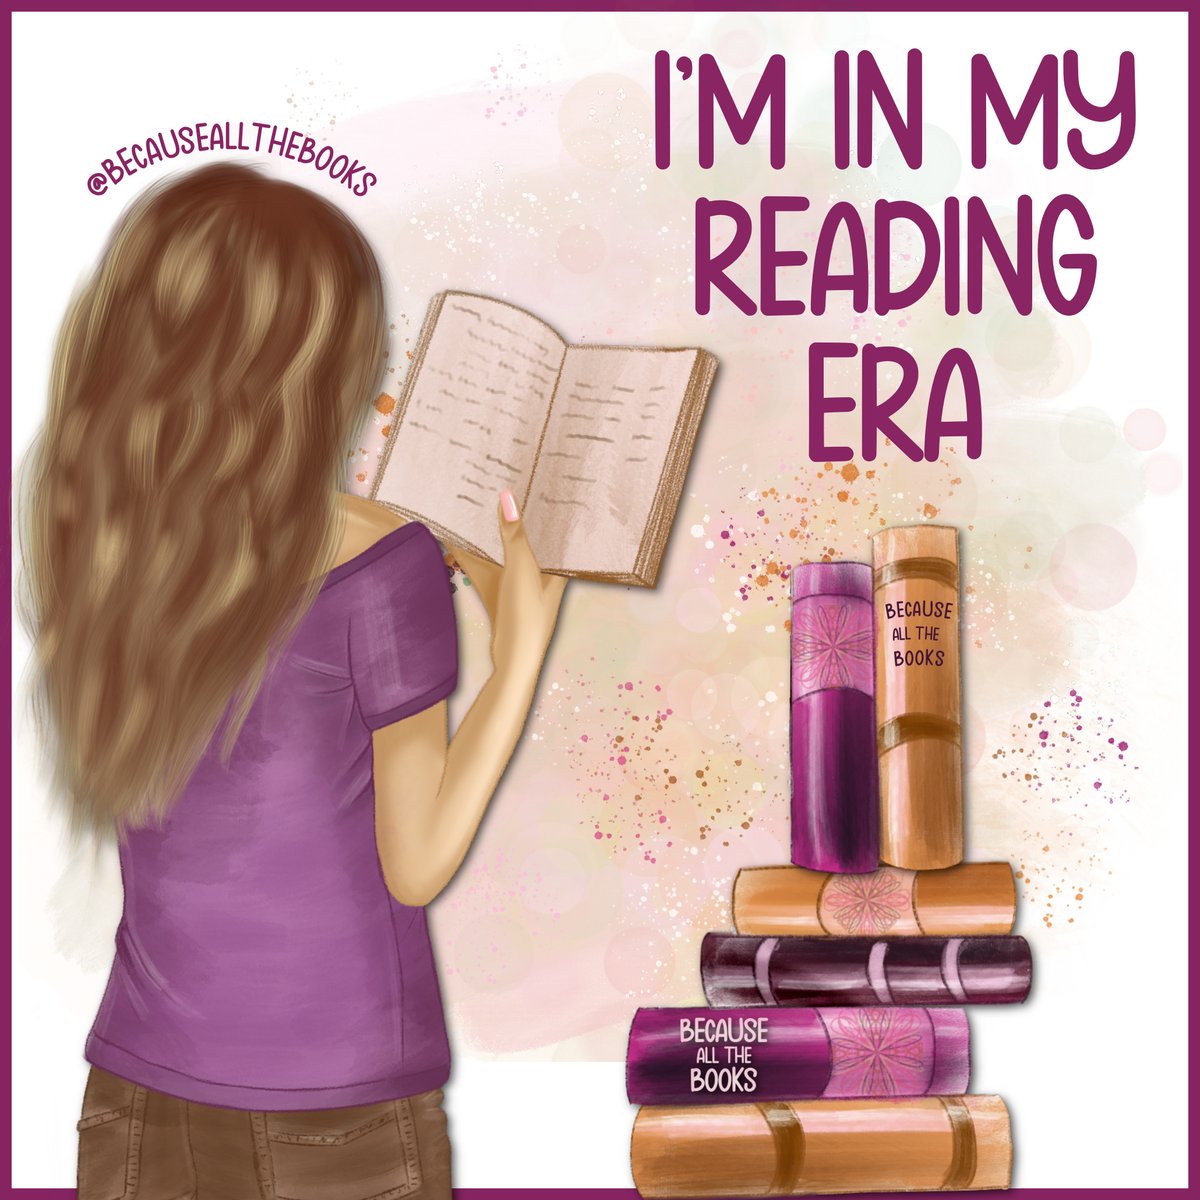 I'm in my reading era!

#BecauseAllTheBooks #BookishLife #ReadingLife #BookishPost #ReadingLove